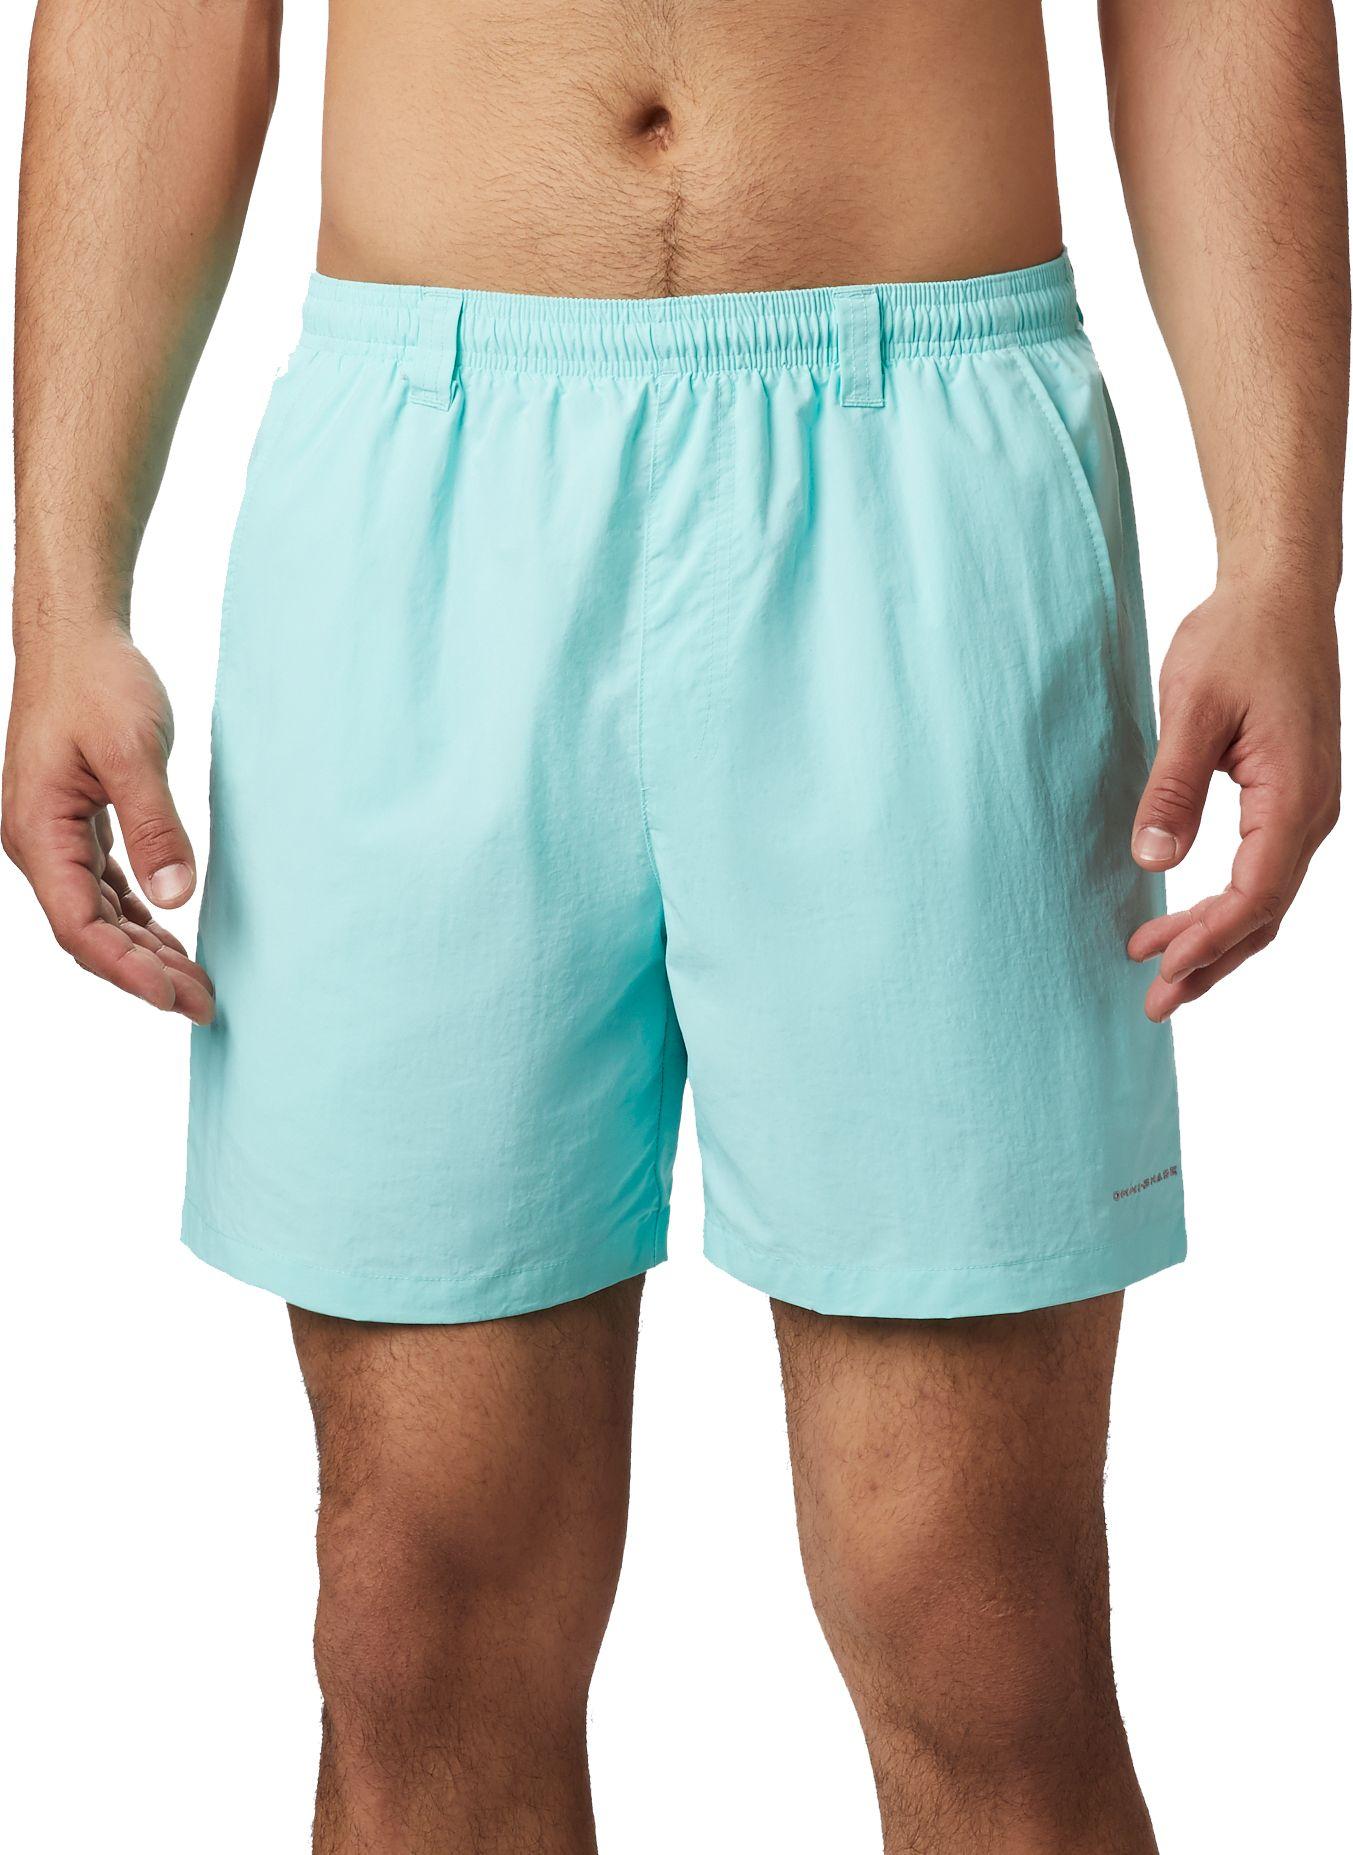 Columbia Pfg Backcast Iii Water Trunks in Blue for Men - Lyst